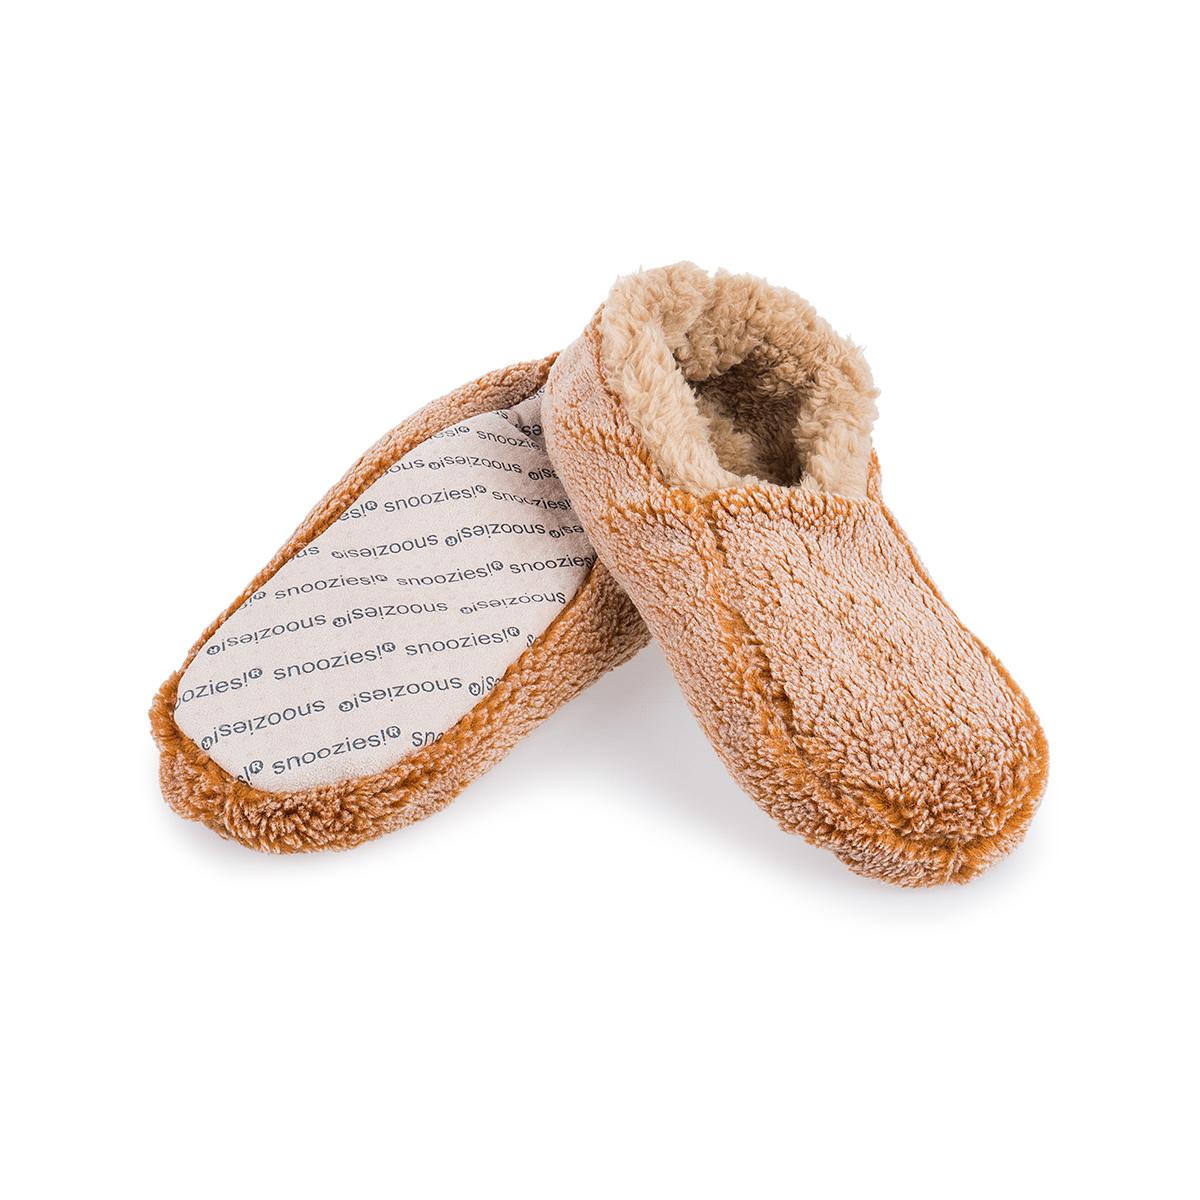 Snoozies | Men's Two Tone Snoozie Slippers